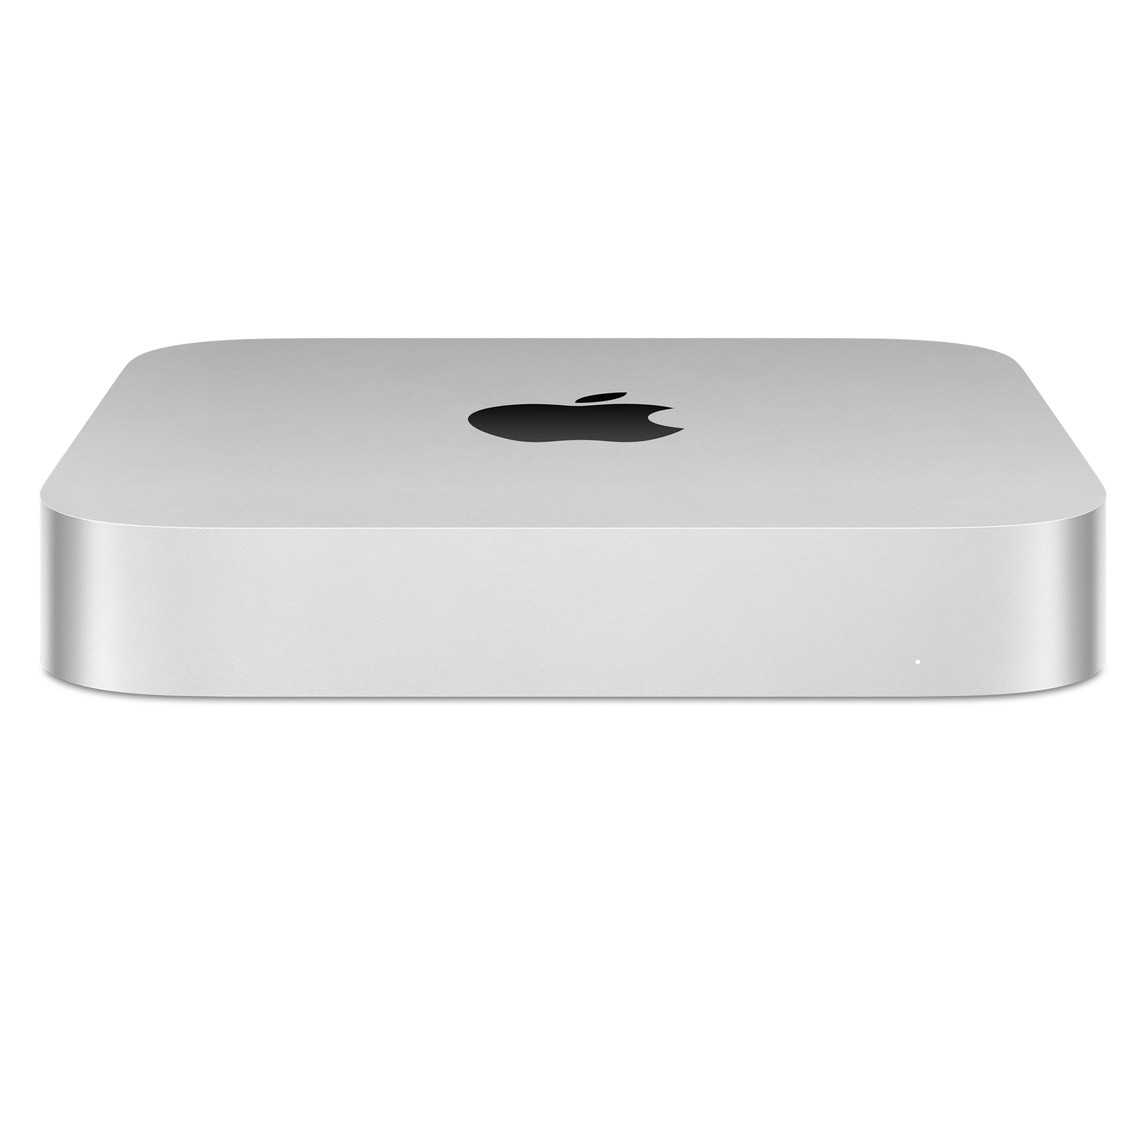 Front, angled view of Mac mini showing the Apple logo on top